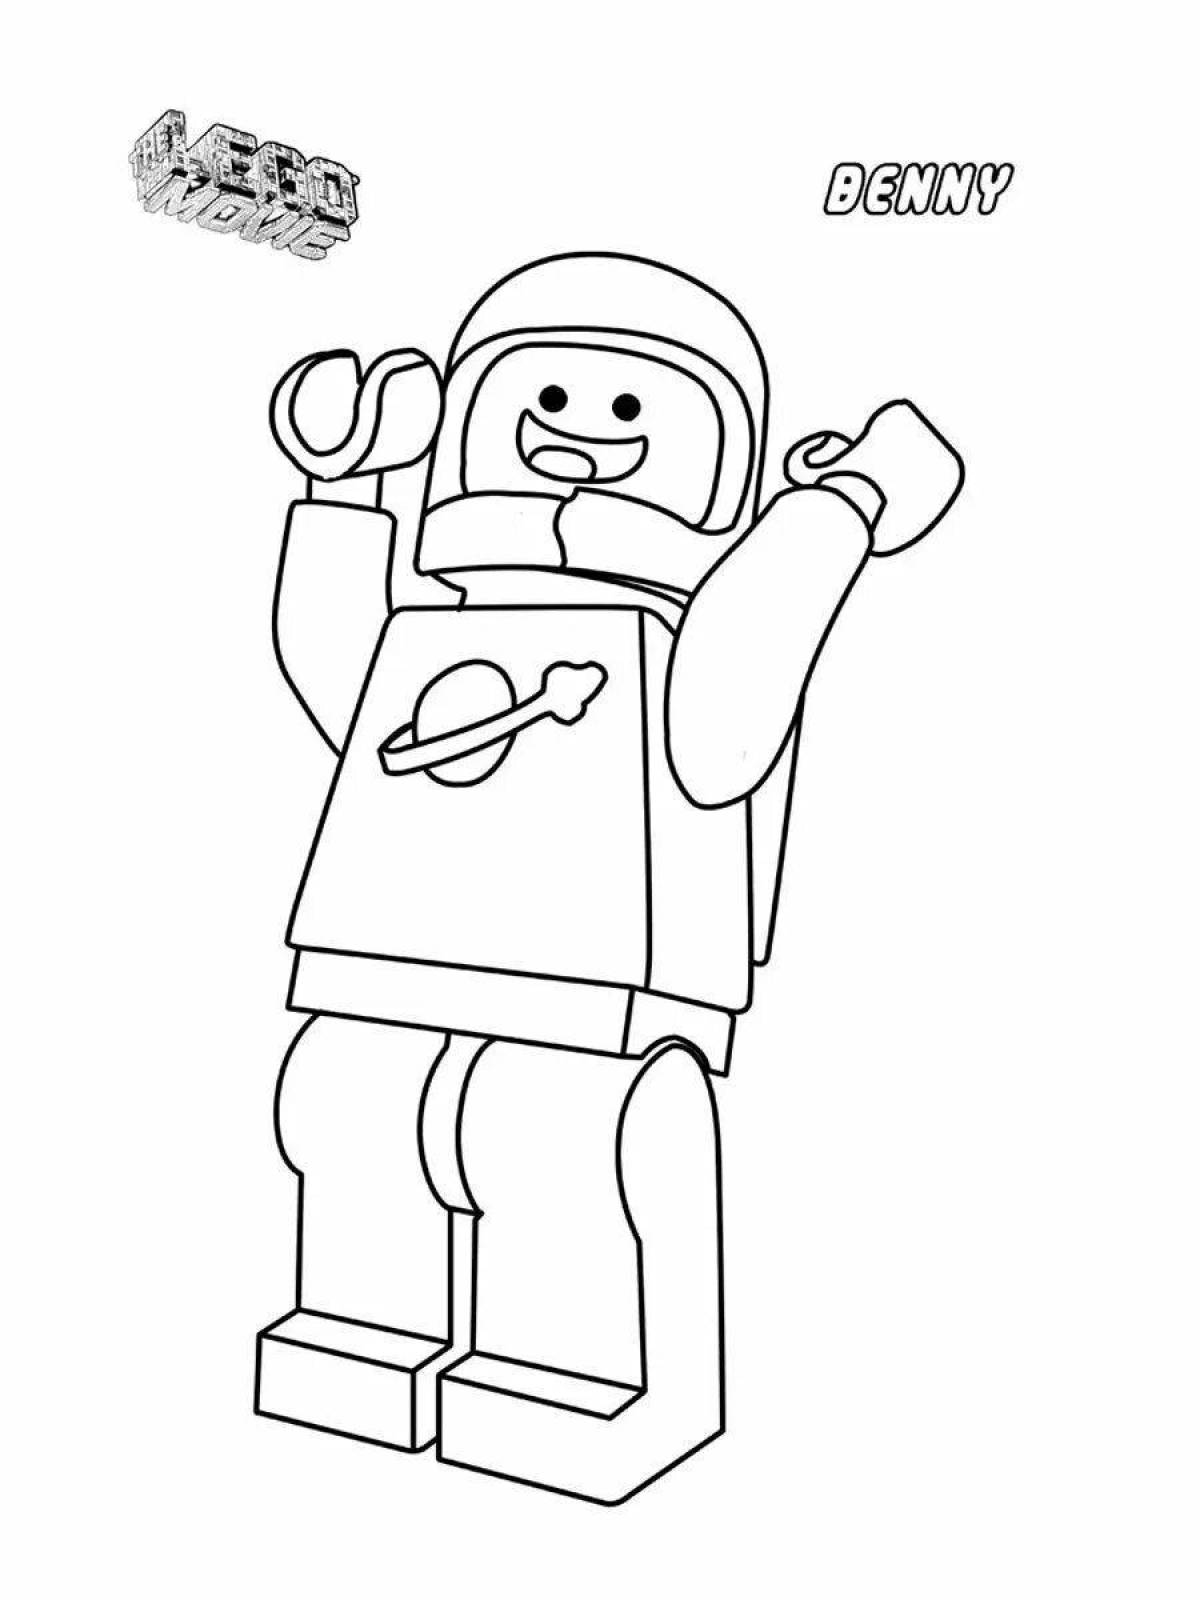 Benny's cute coloring book